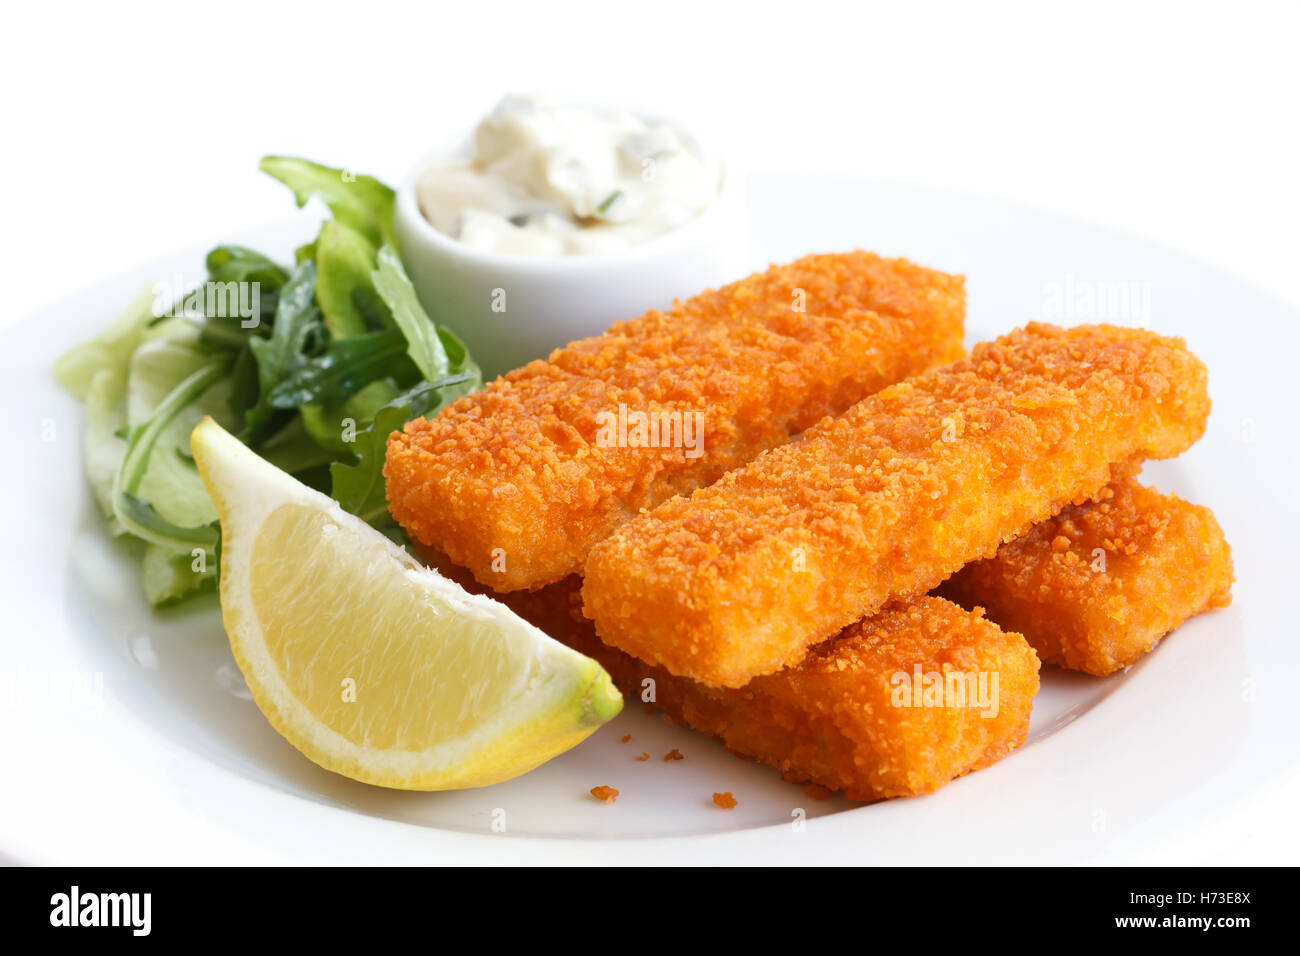 Golden fried fish fingers with lemon and tartar sauce Stock Photo